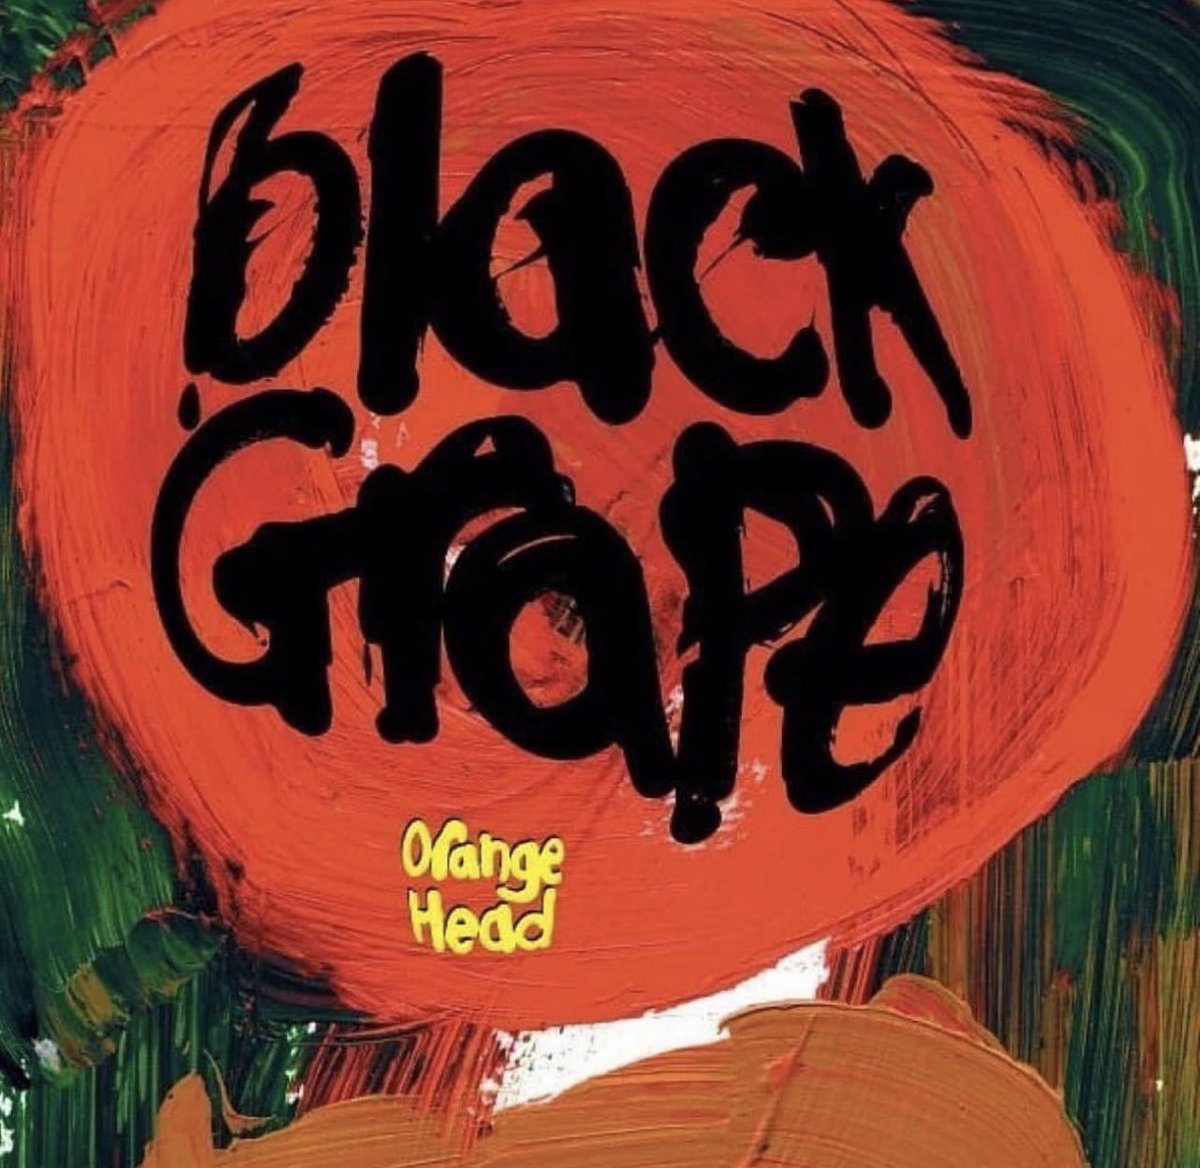 . 💥💥💥 HAVE YOU GOT THE NEW BLACK GRAPE ALBUM YET?💥💥💥 . Order your copy of ‘Orange Head’ 🍊🧡 here now👇🏻 . lnk.to/5GWwnb . (or via link in bio) . 🍇 Limited edition coloured vinyls, signed albums and bundles!! 🍇 . #BlackGrape #ShaunRyder #KermitLeveridge #Newmusic